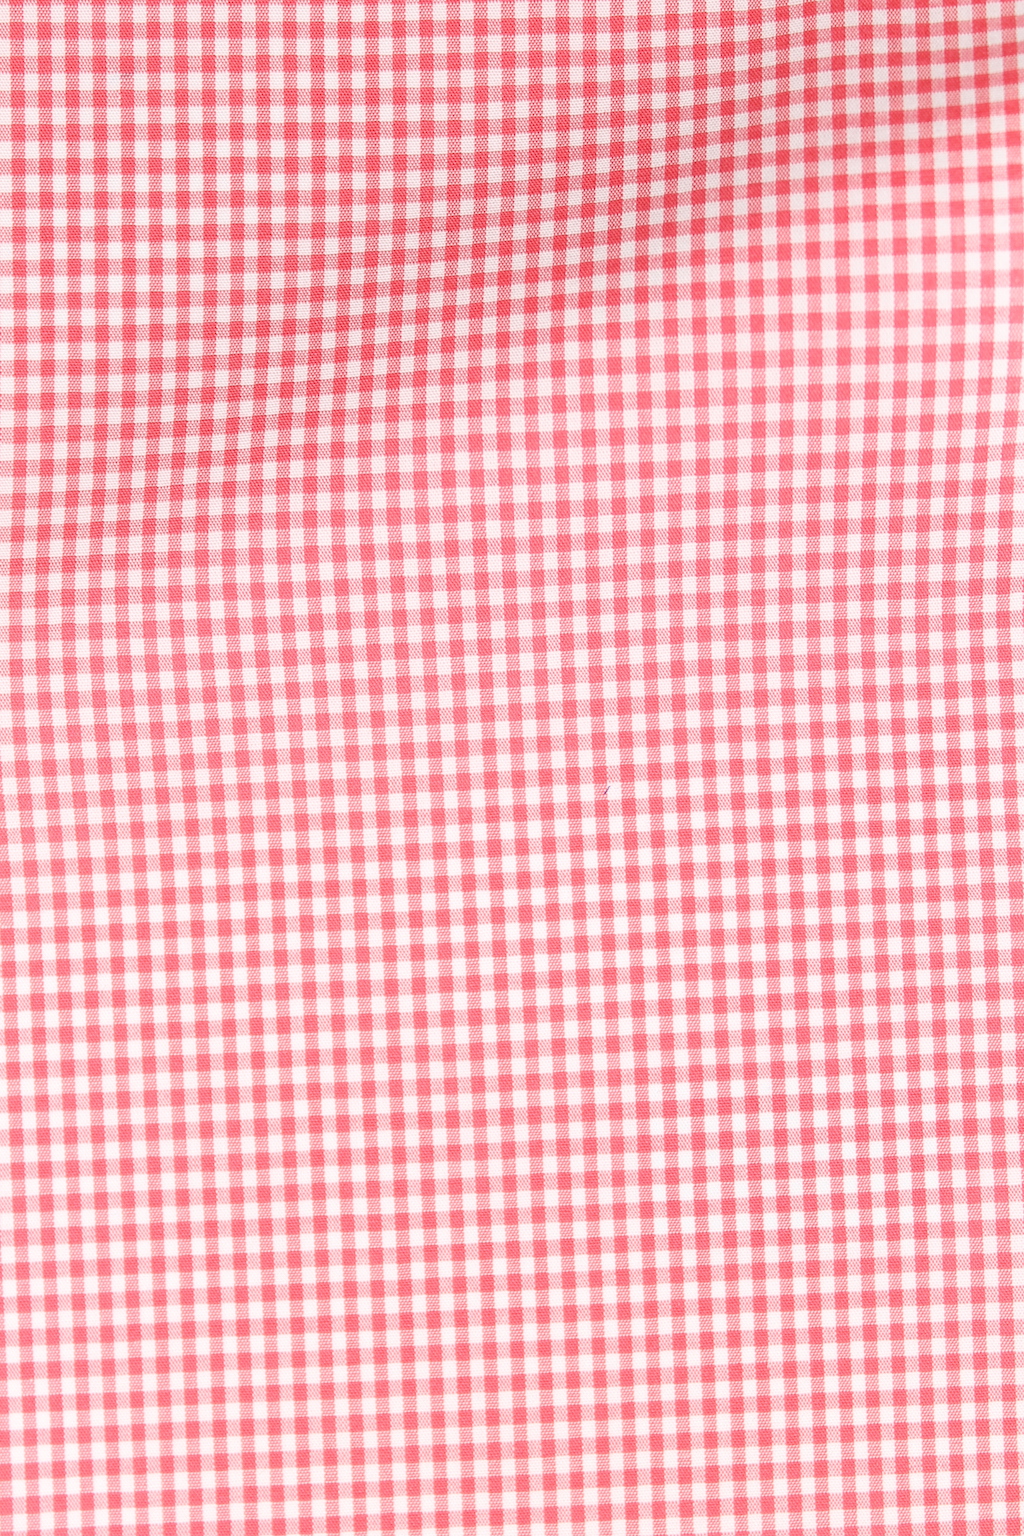 6611 Small Red Gingham.JPG